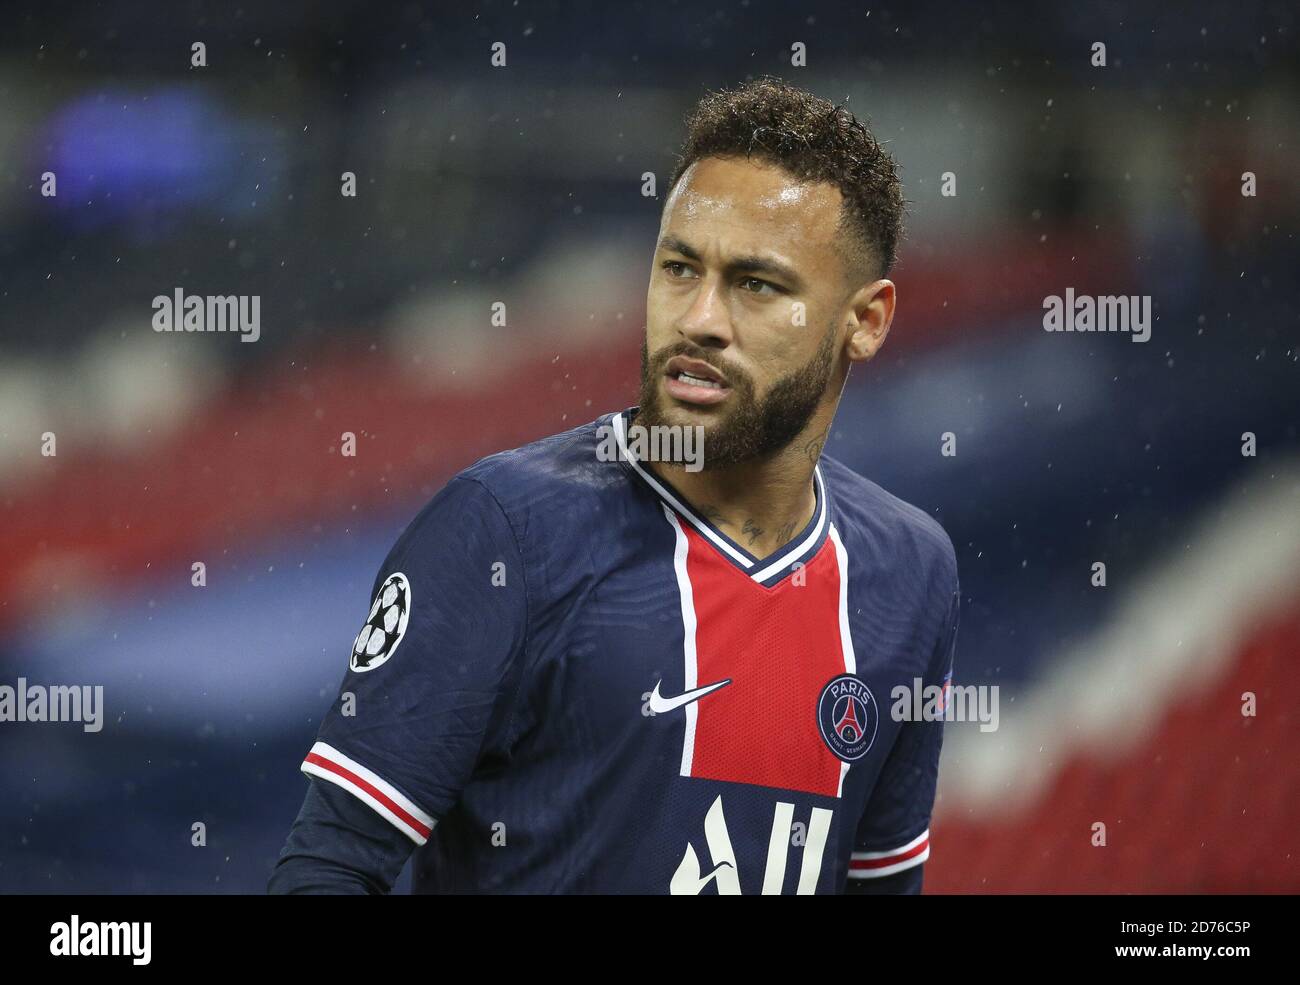 Eymar Jr Of Psg During The Uefa Champions League Group Stage Group H Football Match Between Paris Saint Germain Psg And Manchester United Man U Stock Photo Alamy